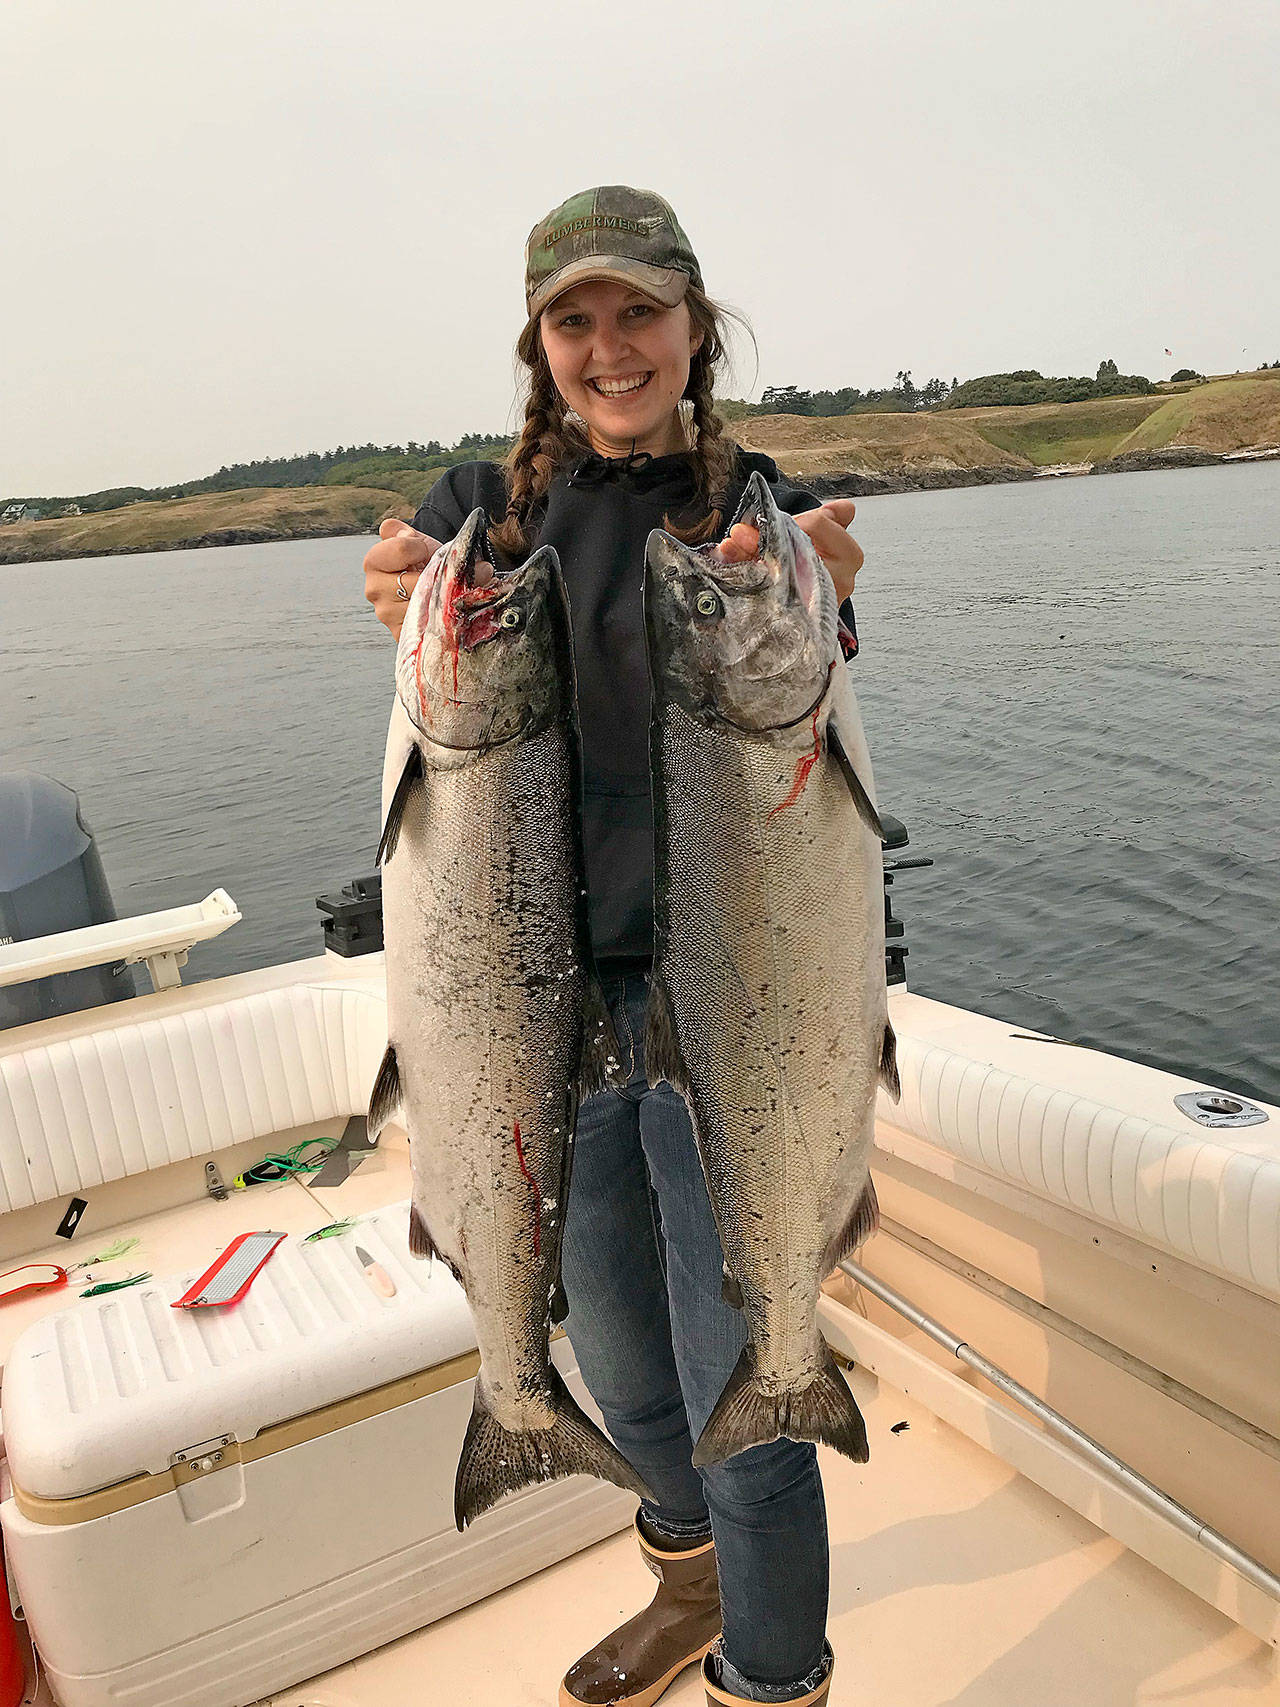 Coupeville resident Kelsey Miranda holds two salmon that she caught off the shores of Whidbey Island. Photo provided